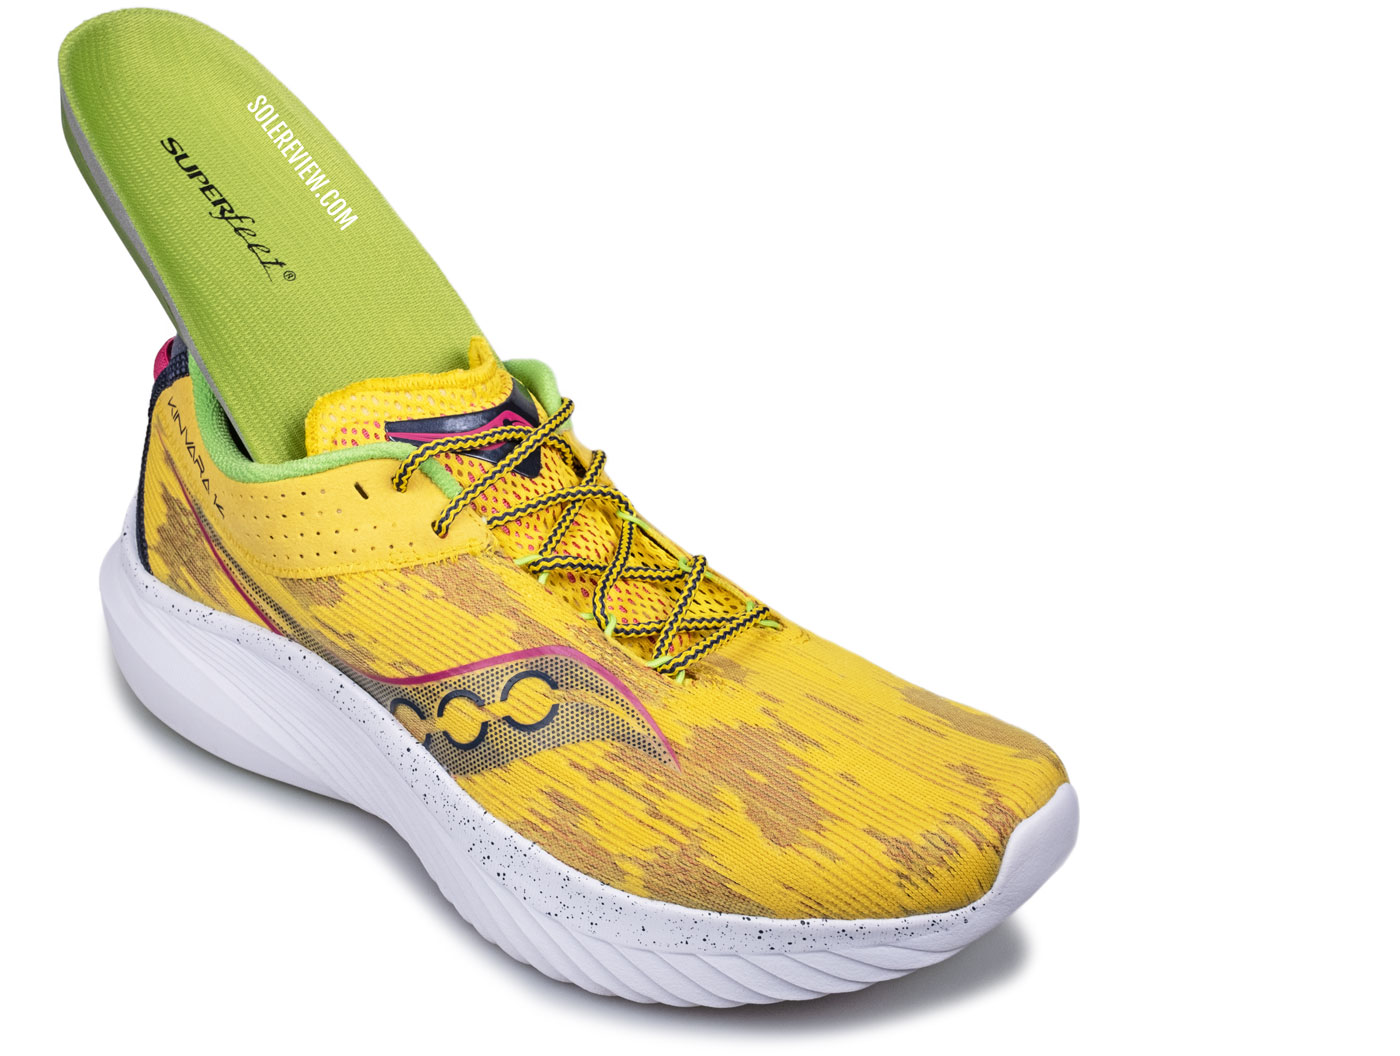 The Saucony Kinvara 14 with Superfeet Green insole.